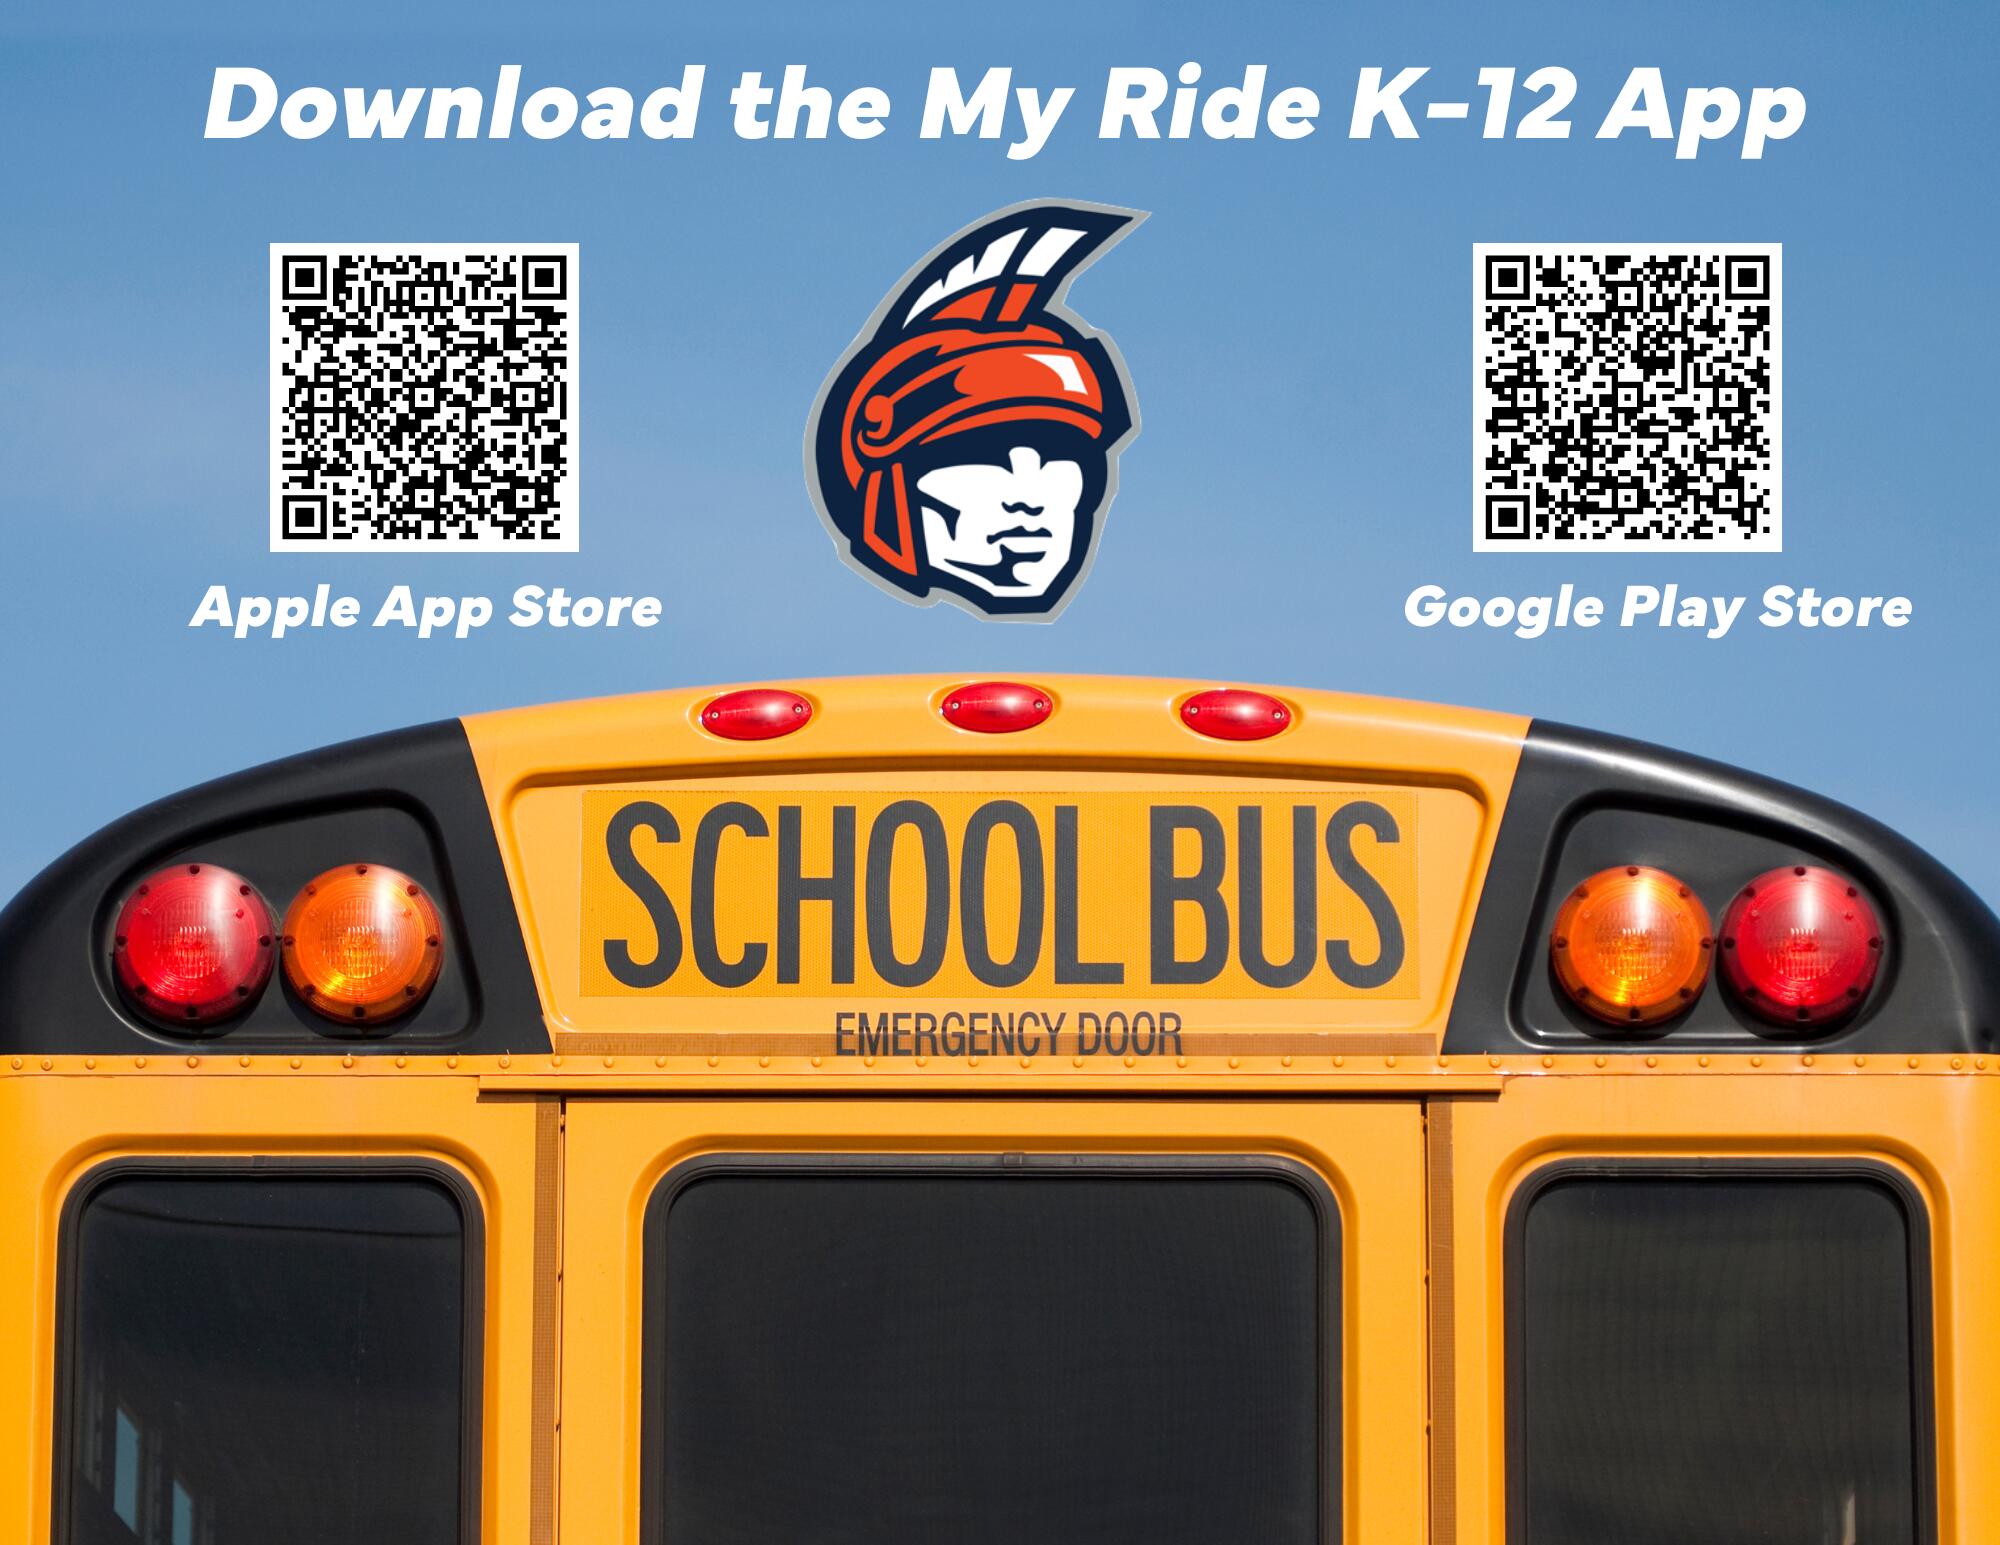 School Bus and Warrior Head with My Ride K-12 App QR Codes